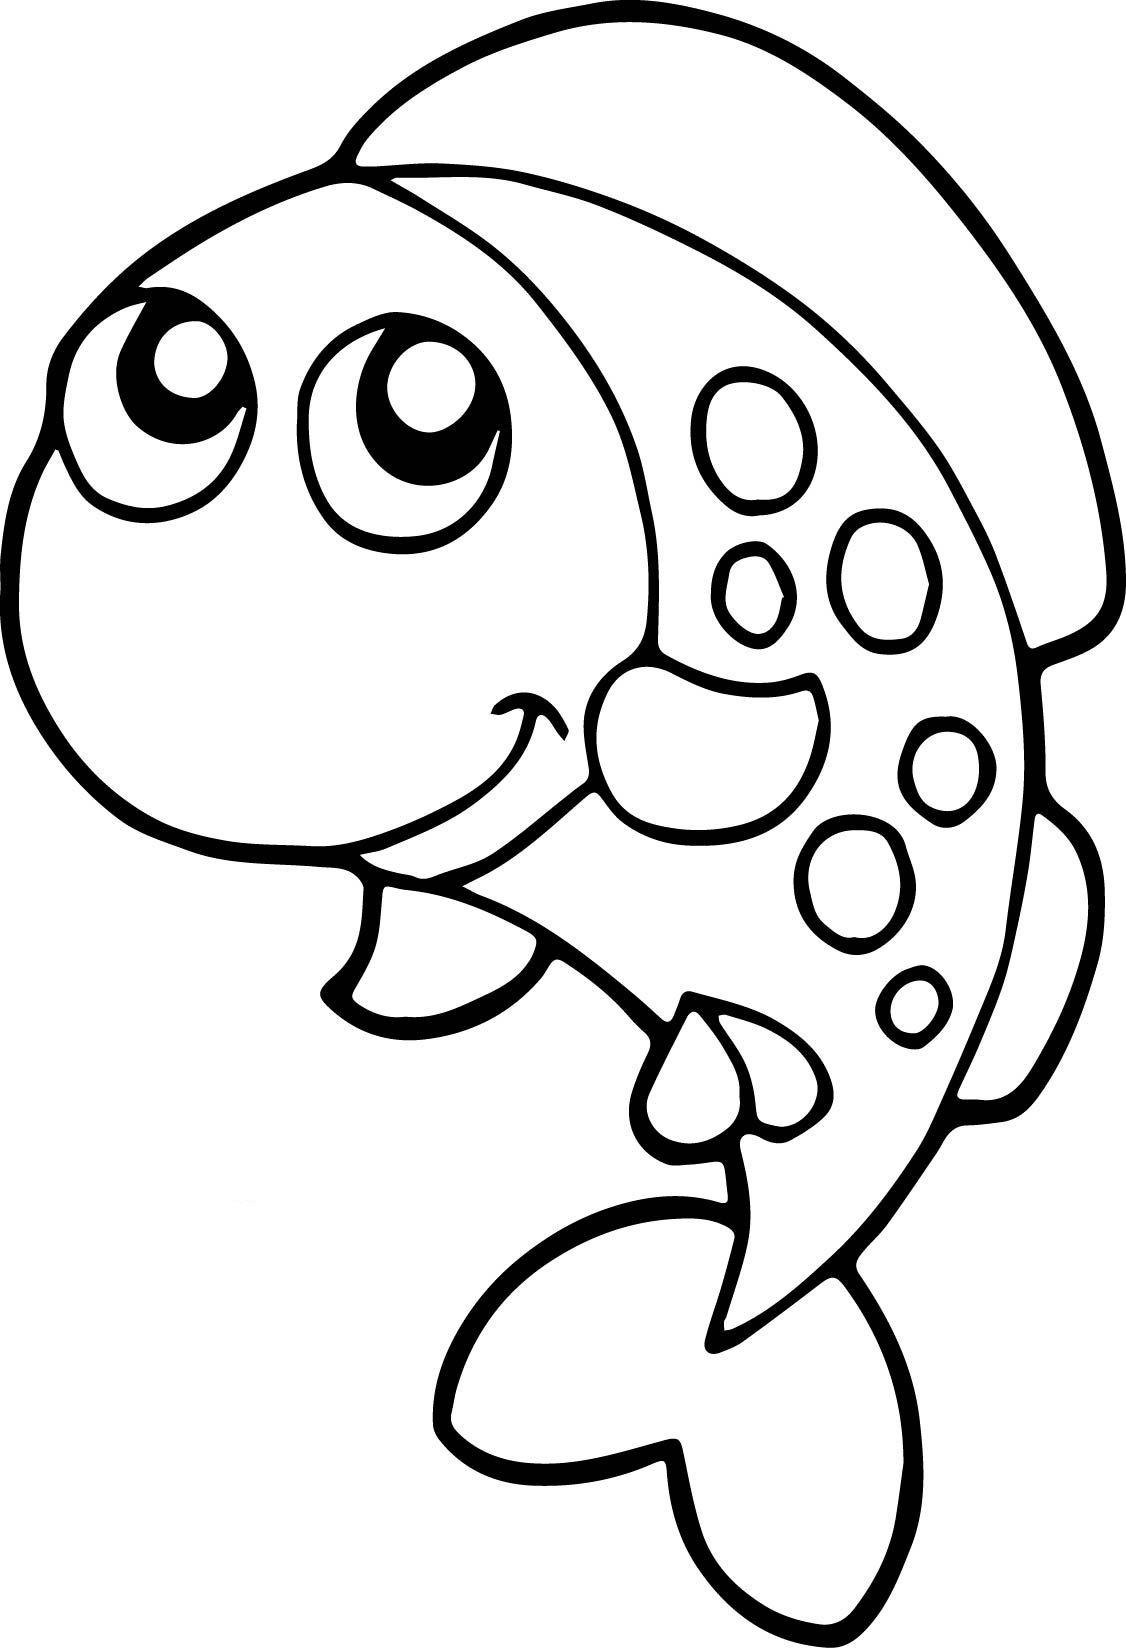 Printable Fish Coloring Pages
 Fish Coloring Pages For Kids Preschool and Kindergarten